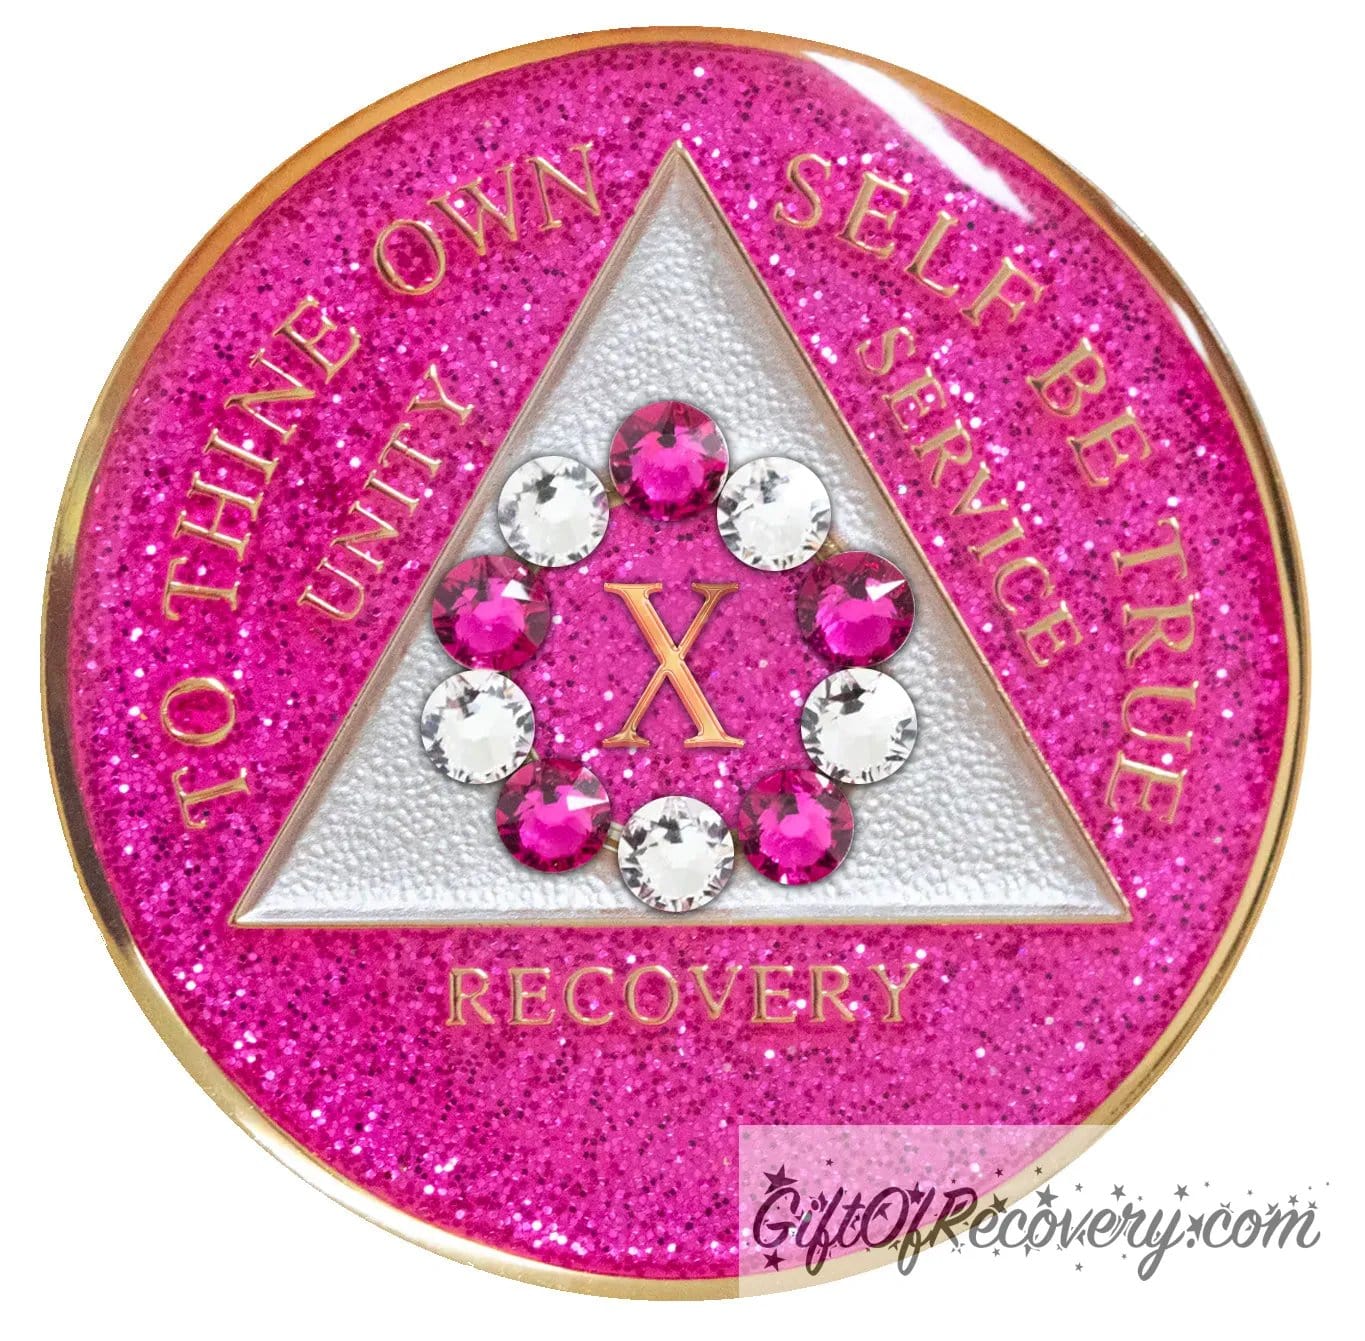 10 Year princess pink glitter 10th step AA medallion with 5 pink genuine crystals and 5 clear genuine crystal, formed in a circle around the year, to thine own self be true, triangle in the center and unity, service, recovery, along with rim of medallion are slightly raised in 14k gold, the center of the triangle is pearl white with the circle being pink glitter, all emphasizing action and reflection, for your favorite sober princess.